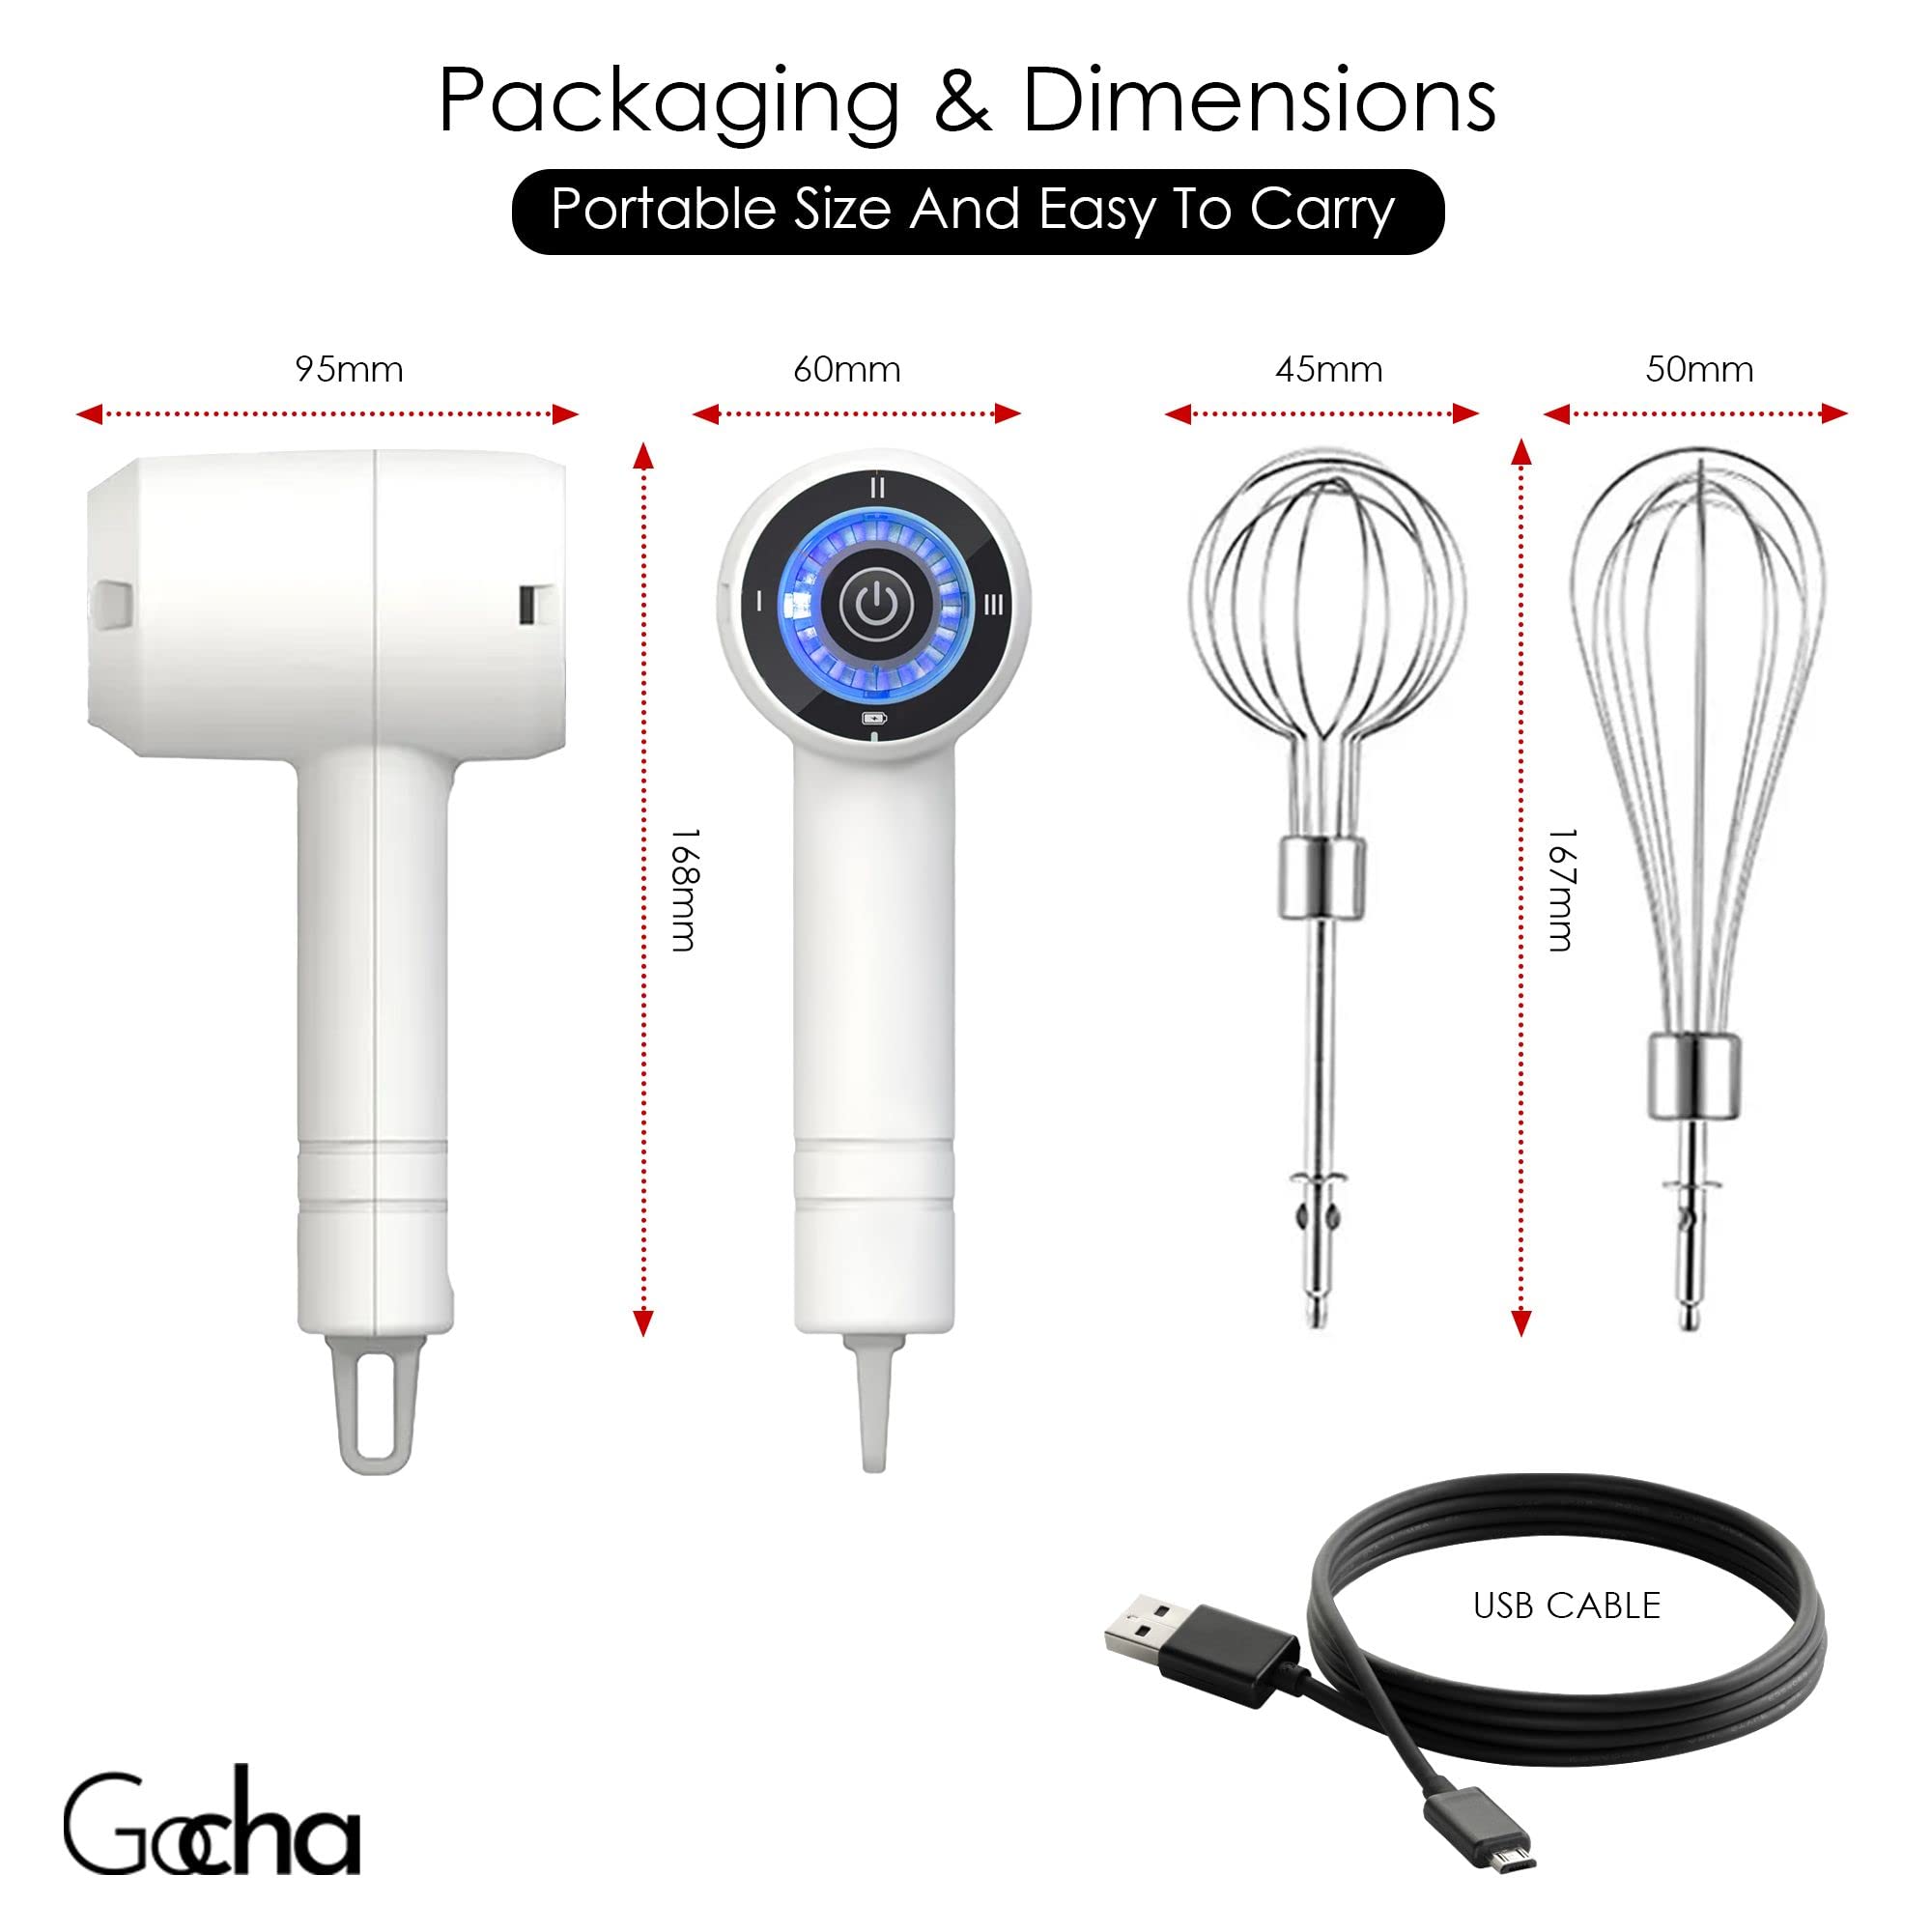 GOCHA Gadgets | Hand Whisk Electric | 3 Speed Handheld Mixer | Two Whisk Mount Baking Mixer | Cordless Electric Hand Mixer For Eggs, Soups, Cream, Batters | Portable, Wireless & Rechargeable (White)